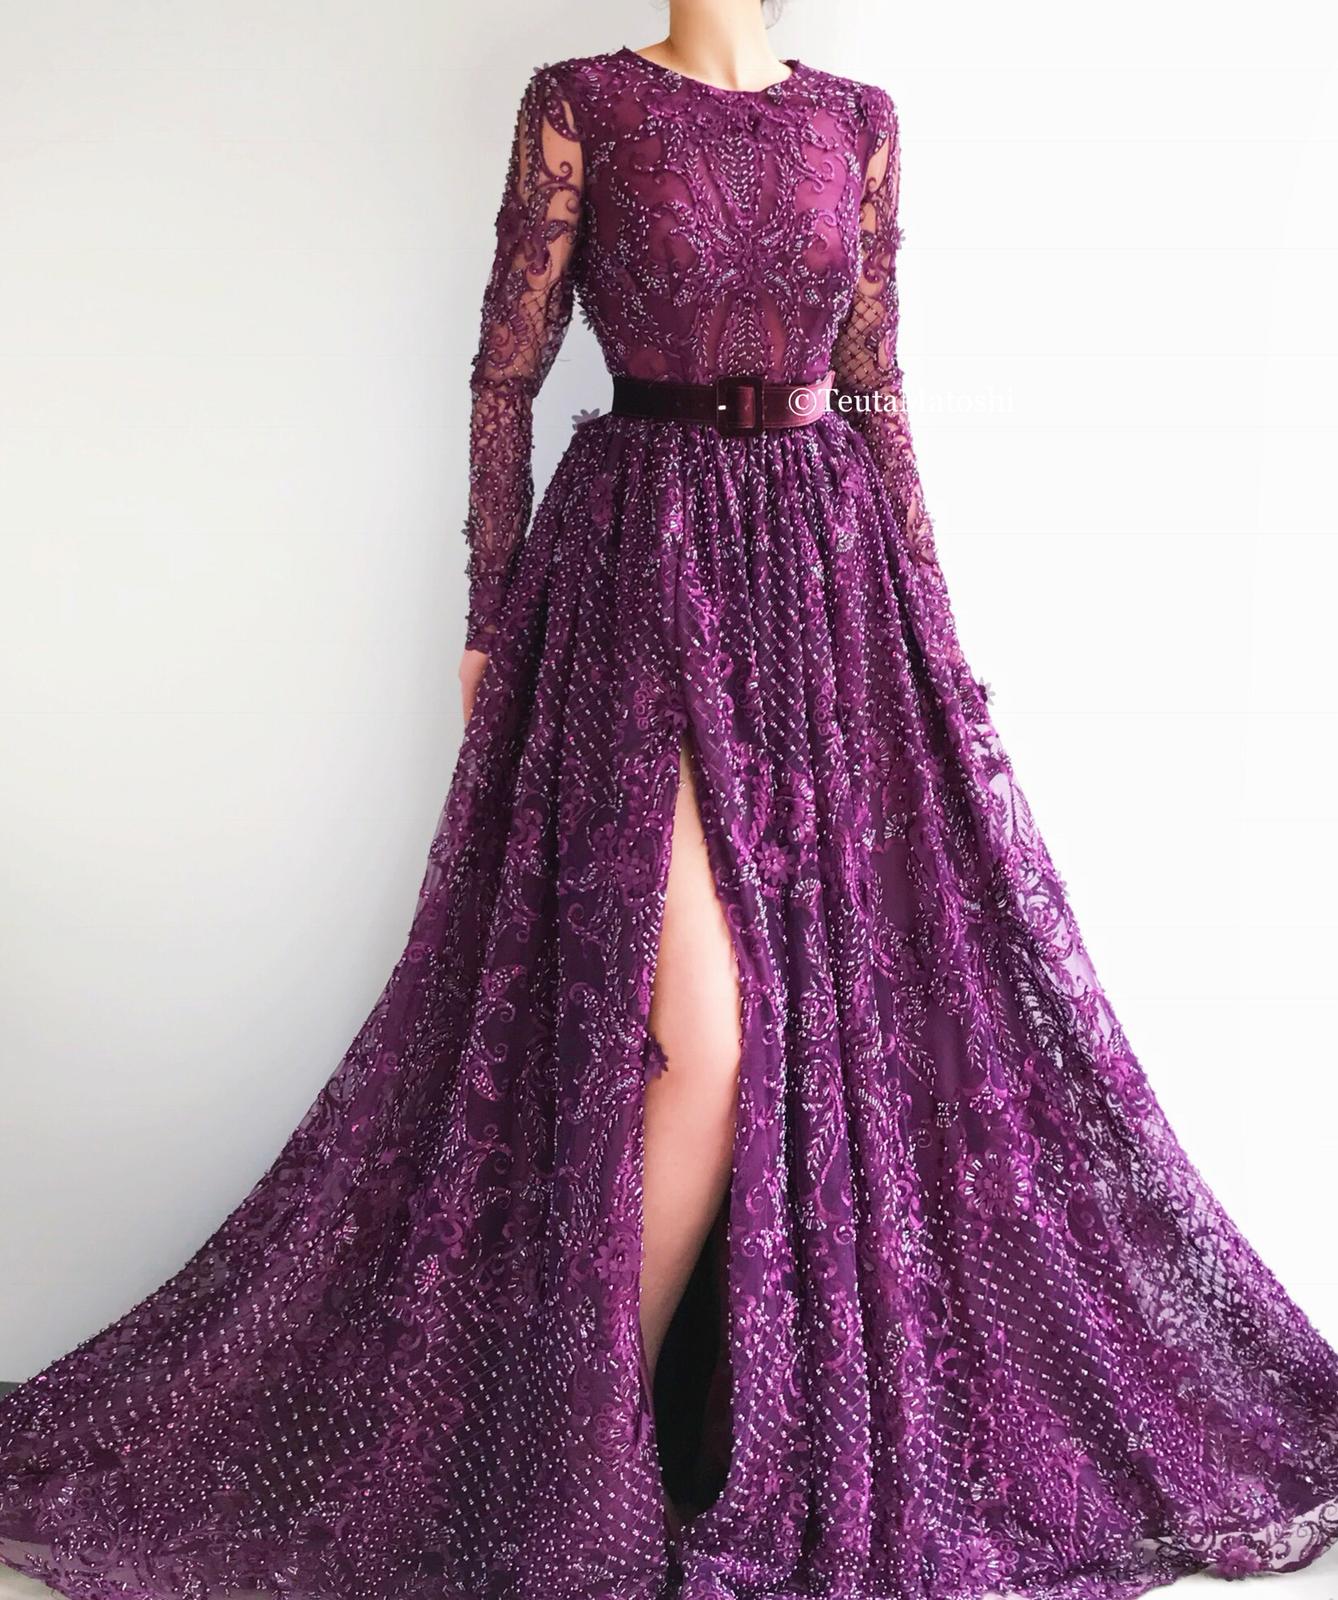 Magenta Lace Bloom Gown | Teuta Matoshi